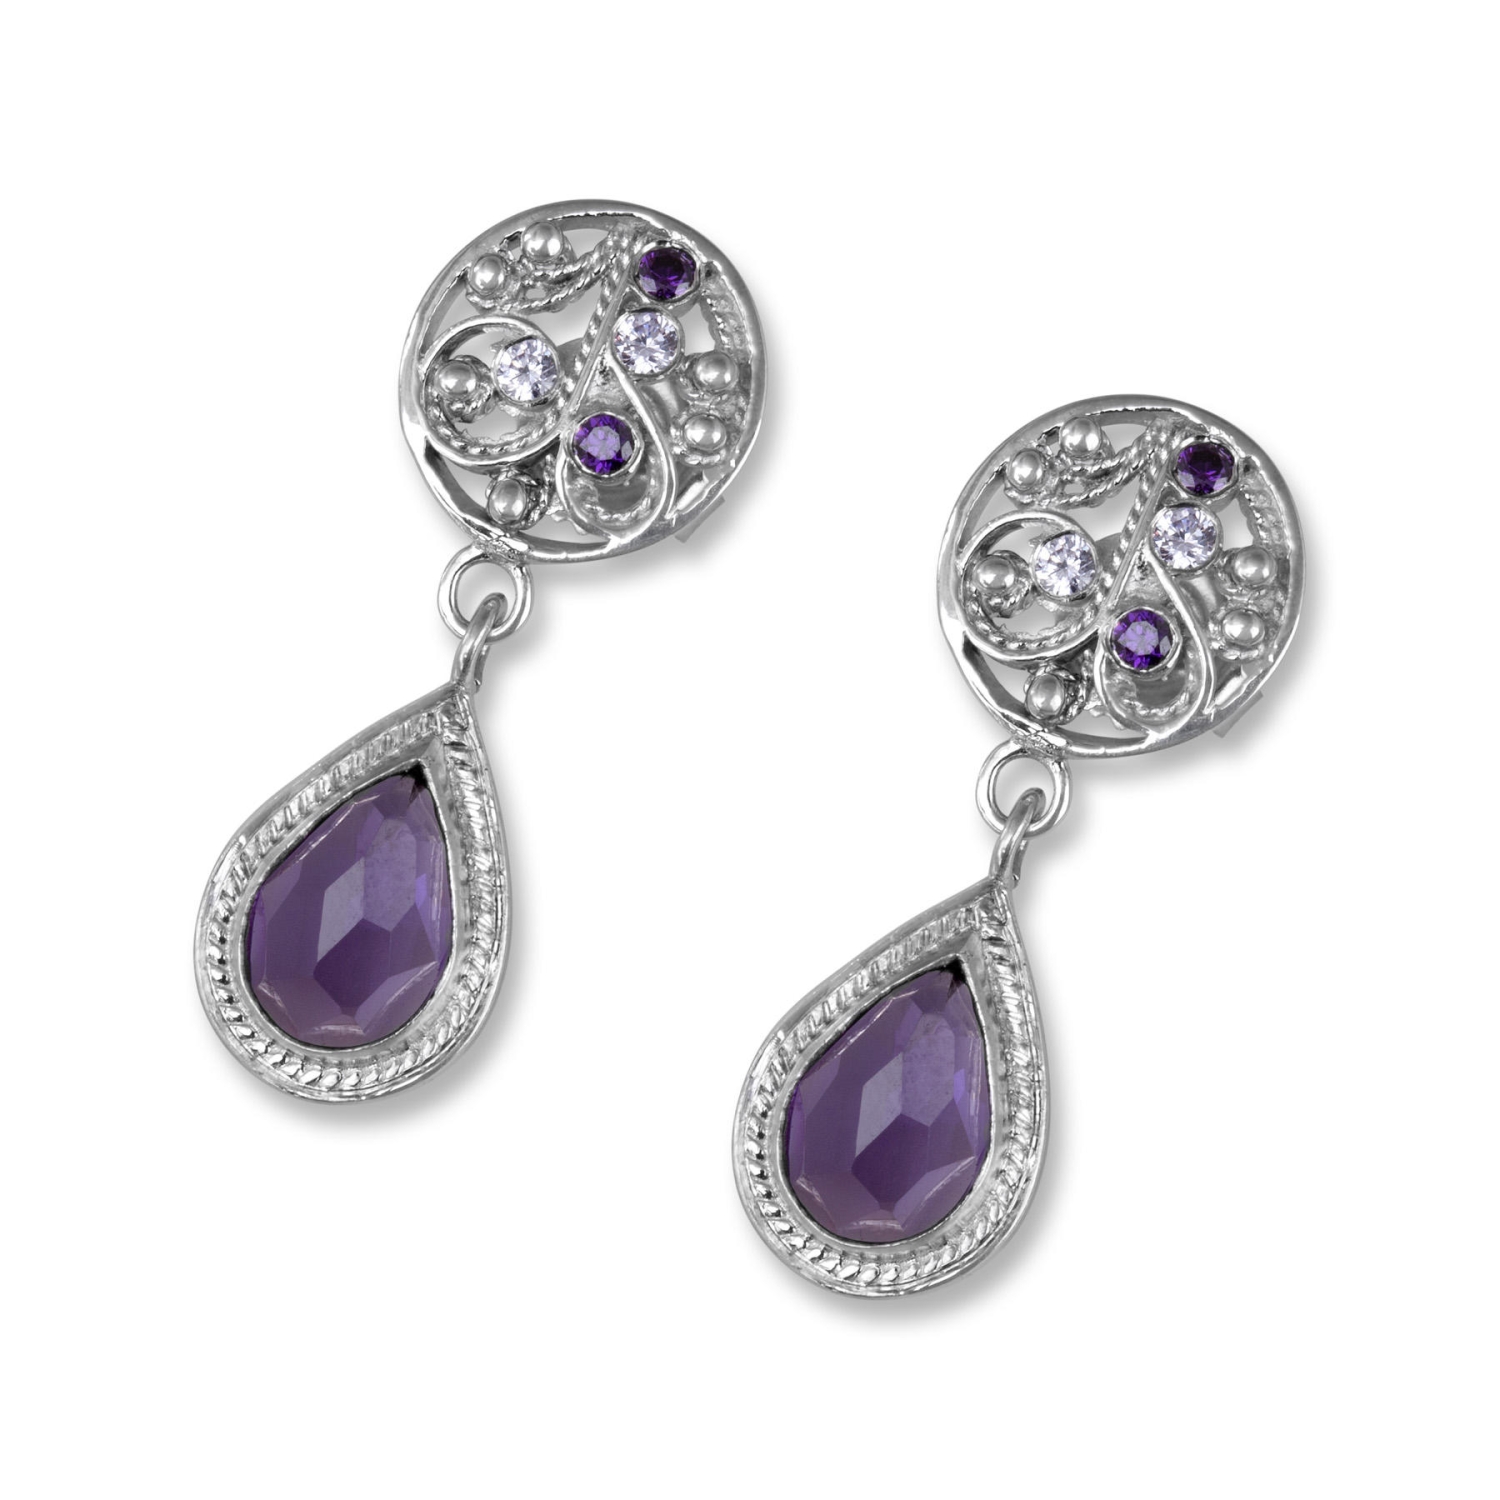 14K White Gold Filigree Teardrop Earrings with Amethysts and Lavender Stones - 1